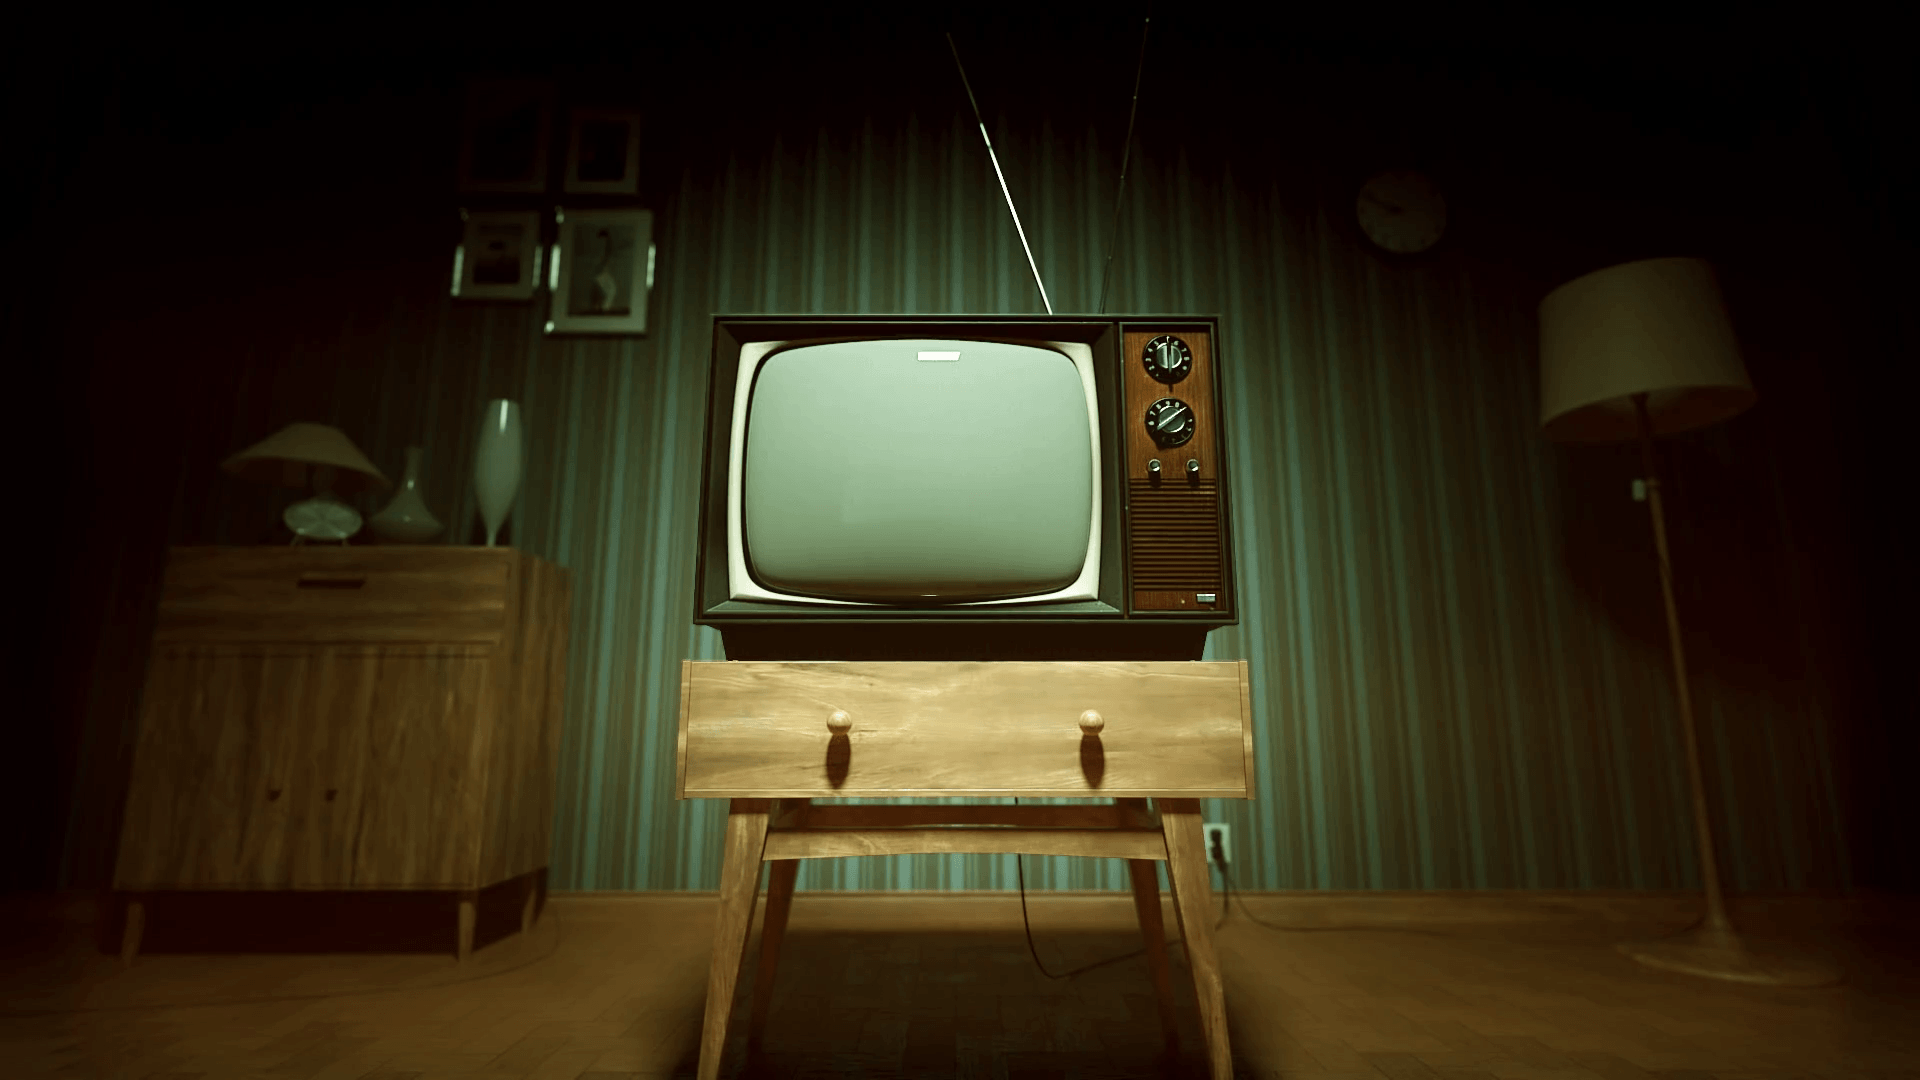 Classic TV Wallpapers - Free TV Backgrounds - WallpaperAccess